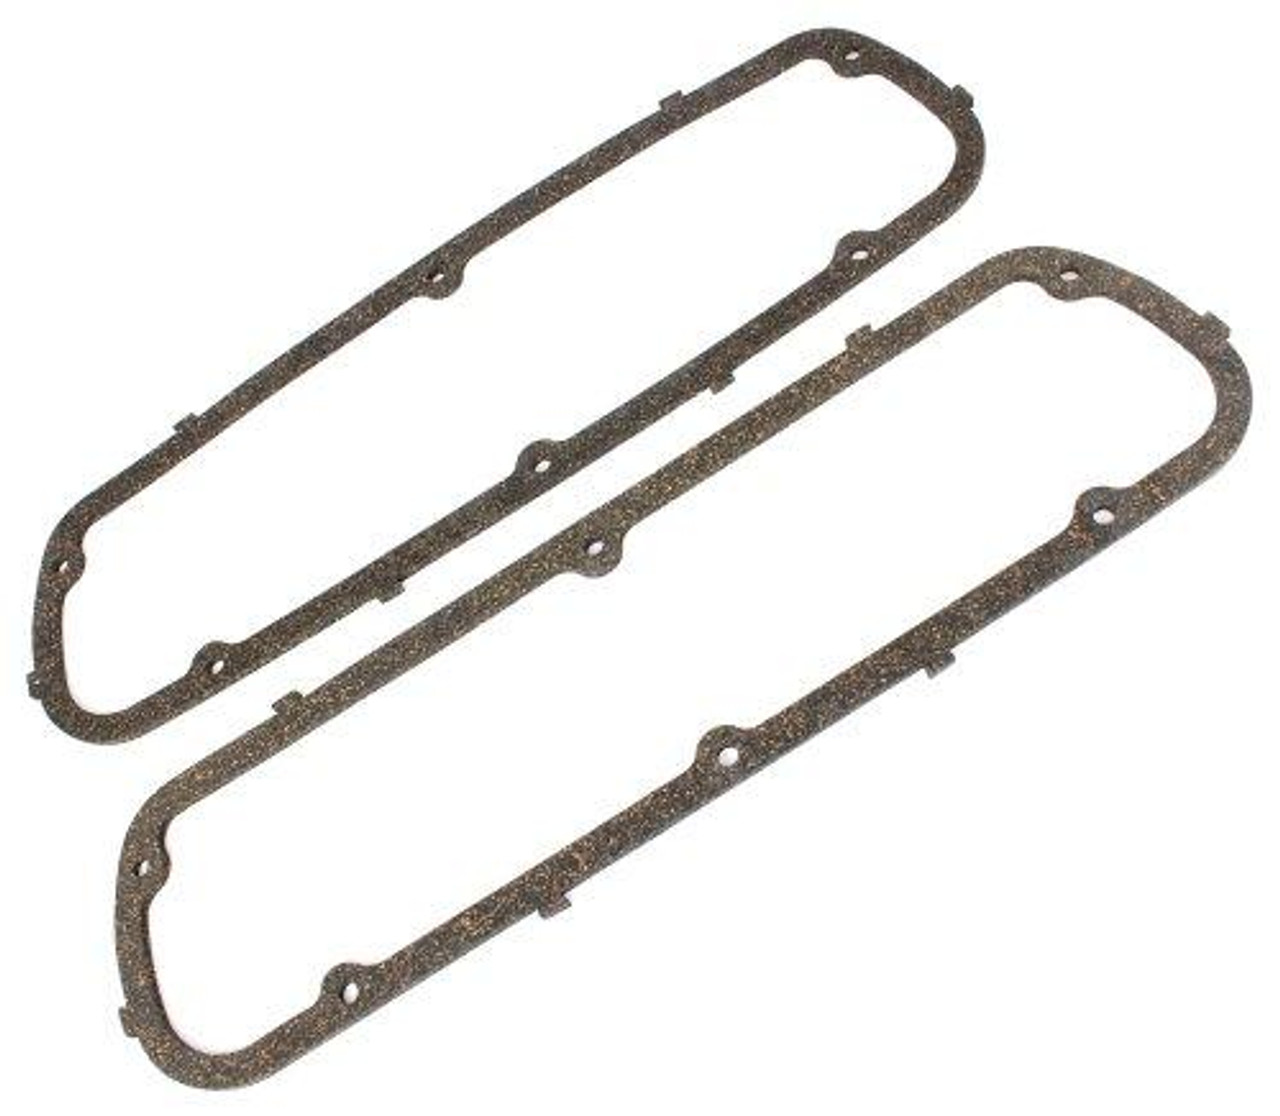 Valve Cover Gasket - 1991 Ford Thunderbird 5.0L Engine Parts # VC4113ZE72